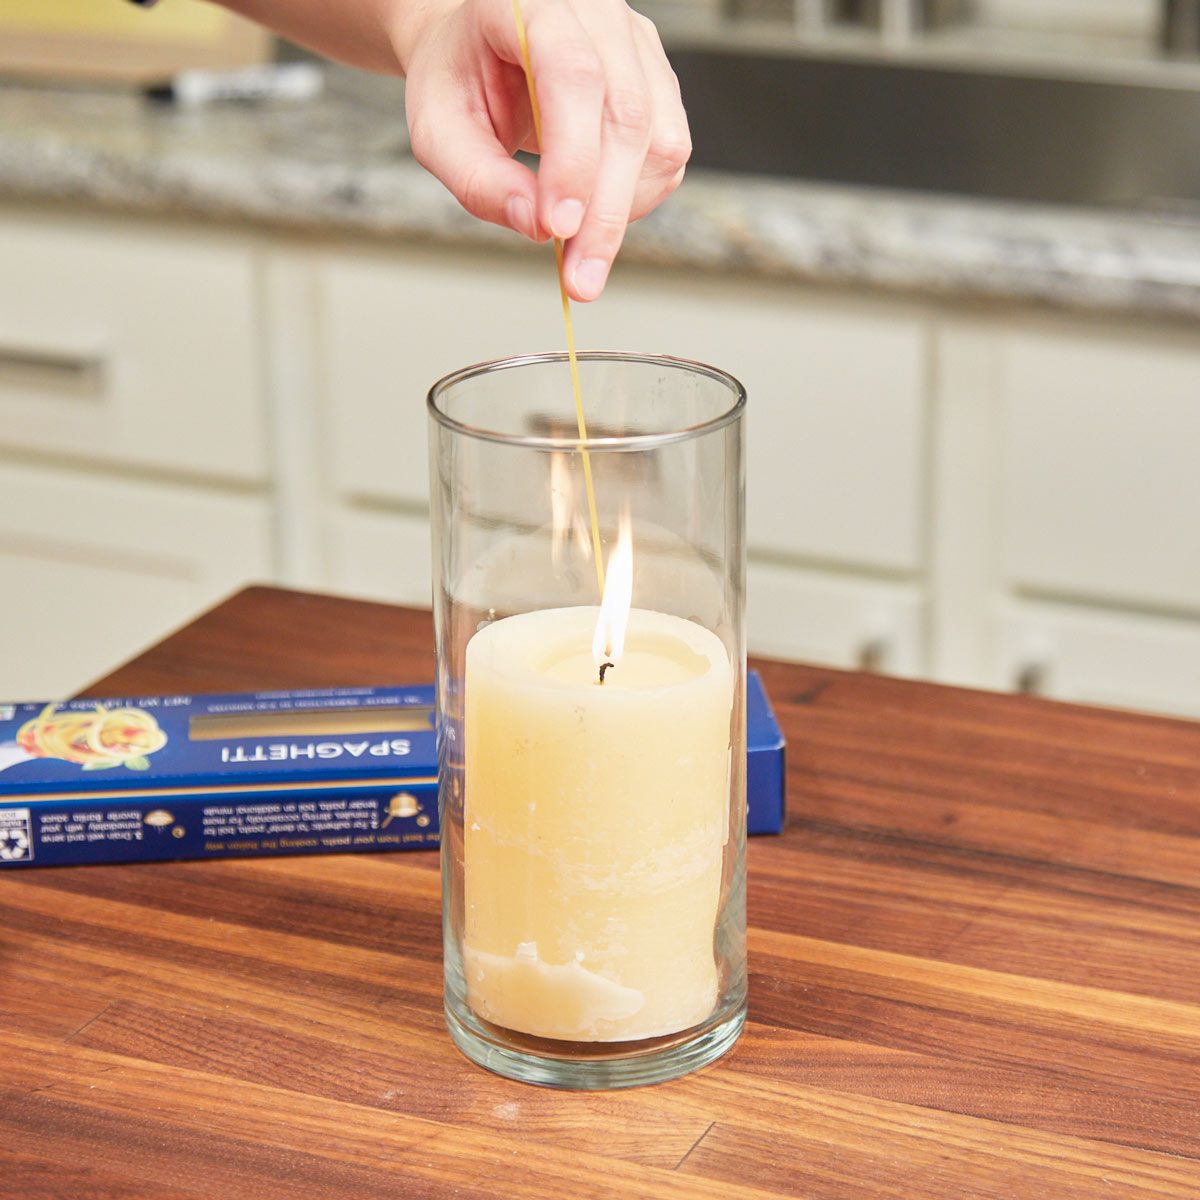 Hand holding a spaghetti noodle as a candle lighter from Family Handyman